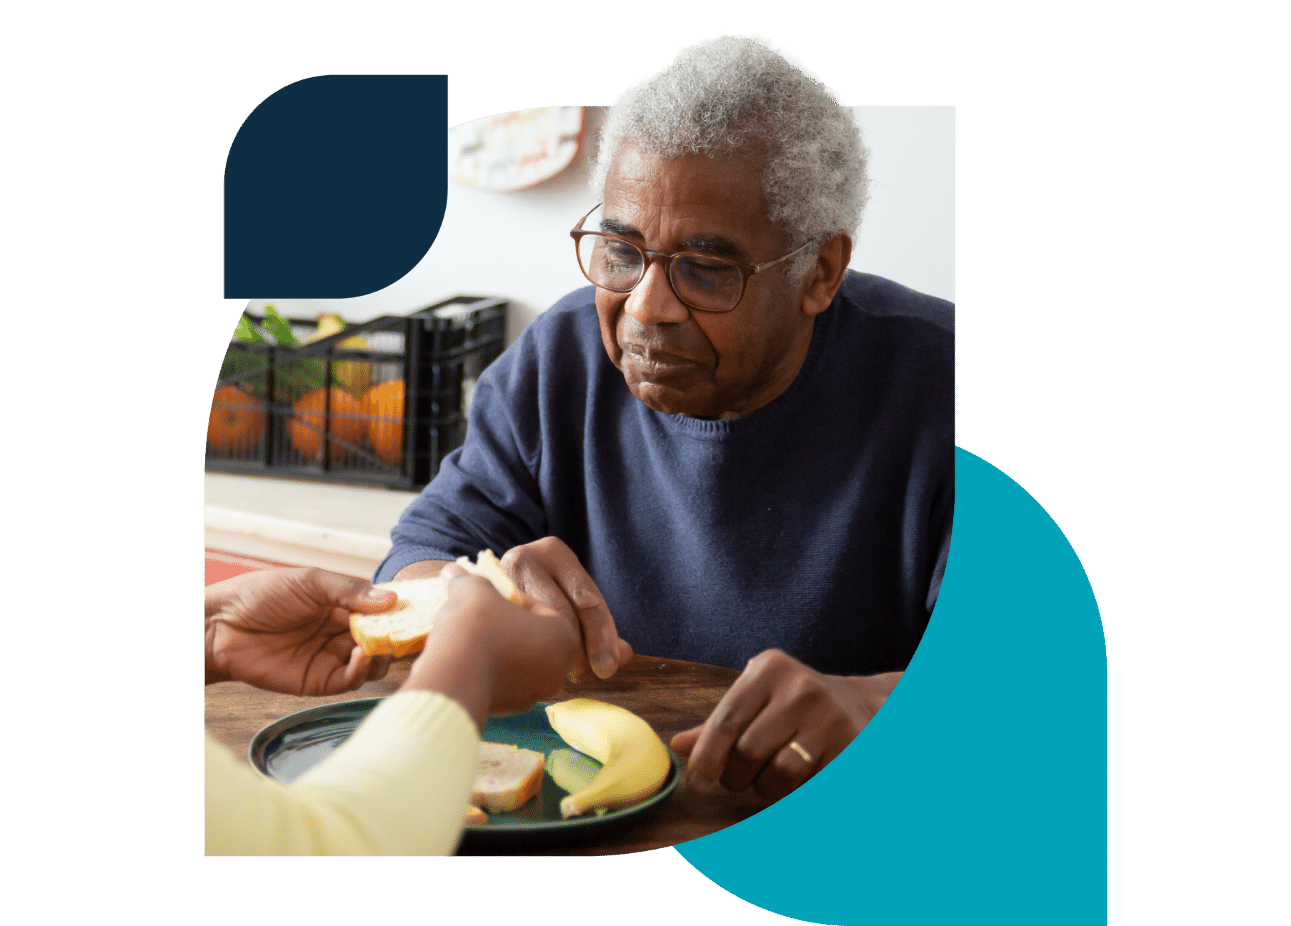 A care recipient is served a meal